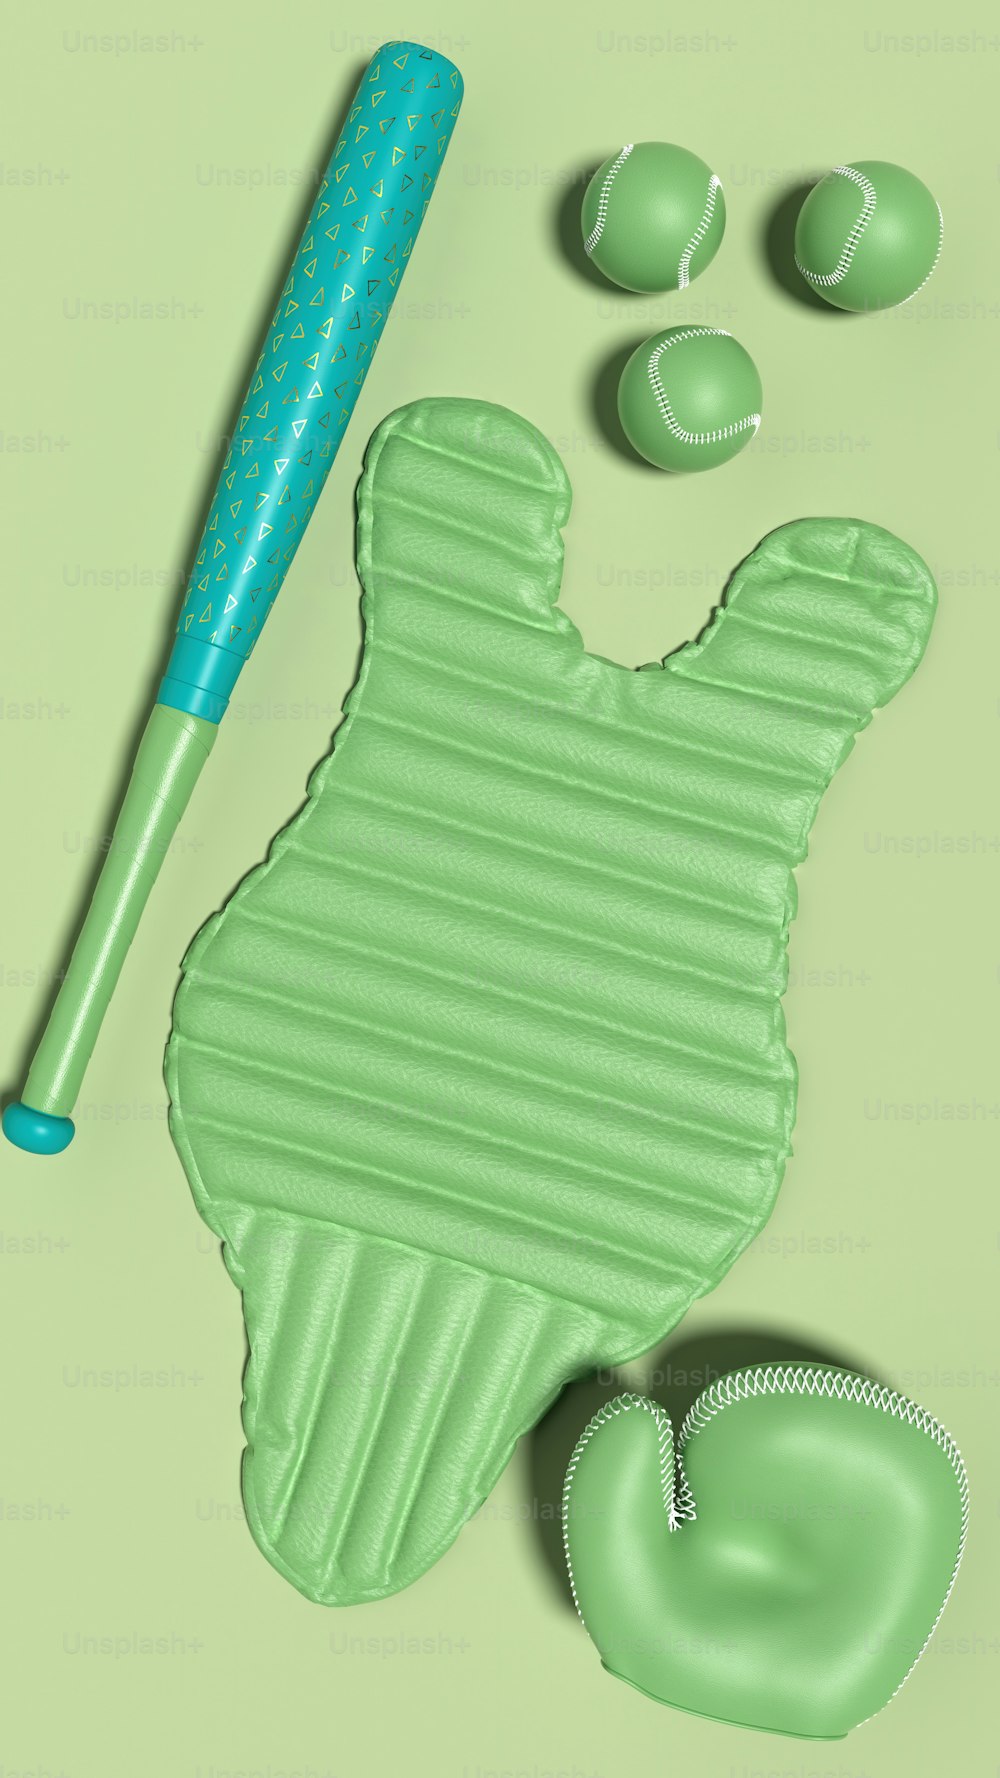 a green object with a baseball bat and other items